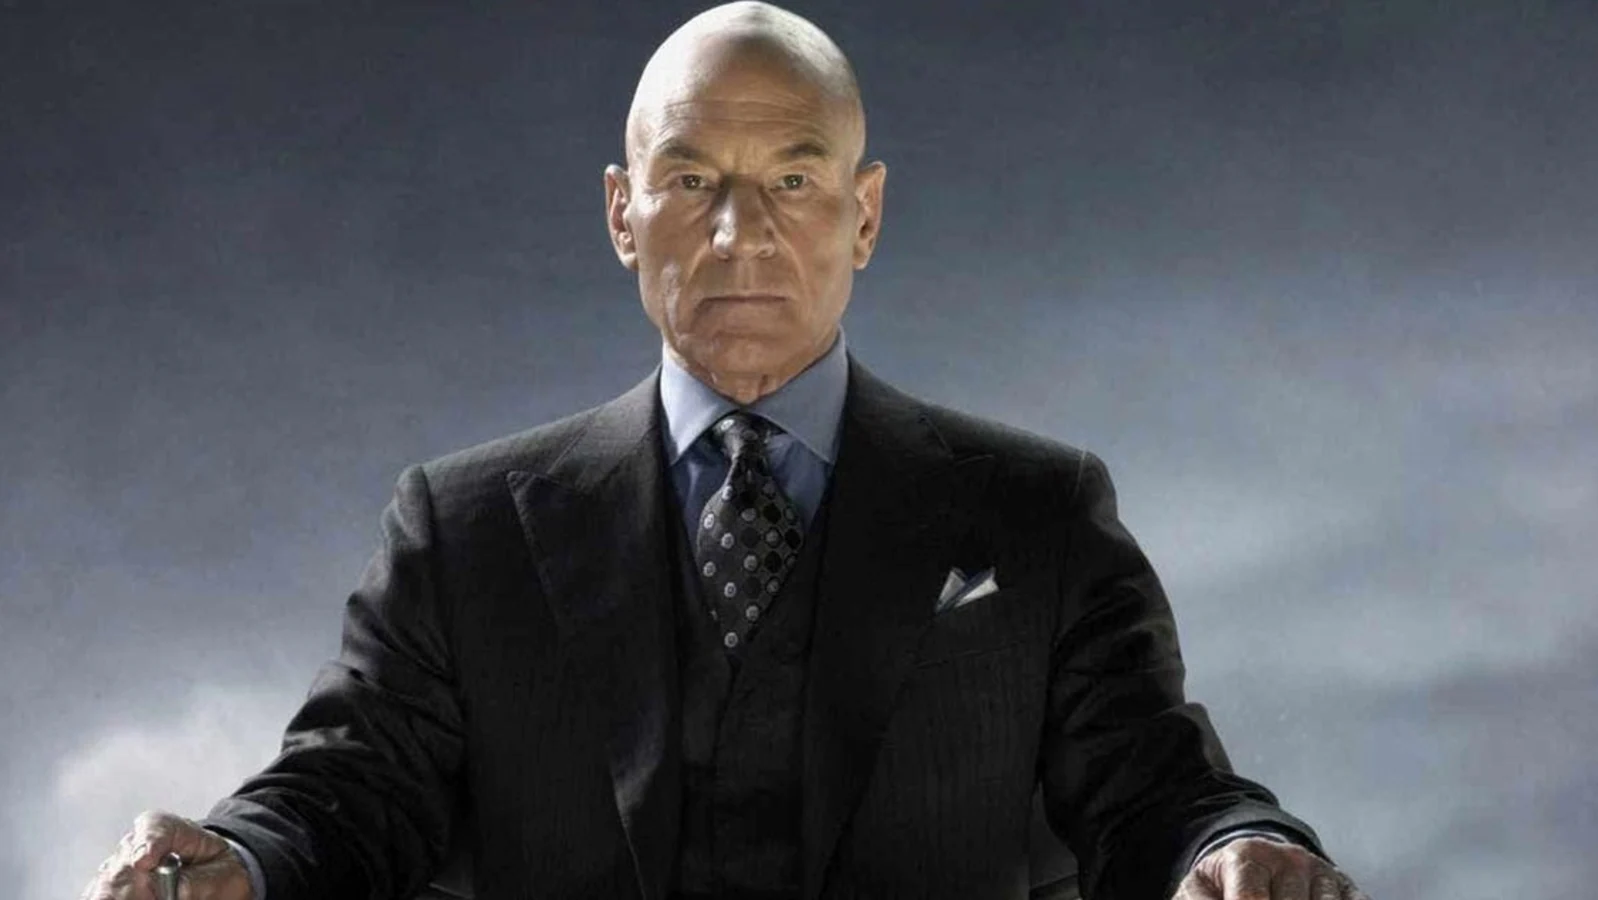 Doctor Strange in the Multiverse of Madness: Patrick Stewart confirms he is playing Professor X in Marvel film